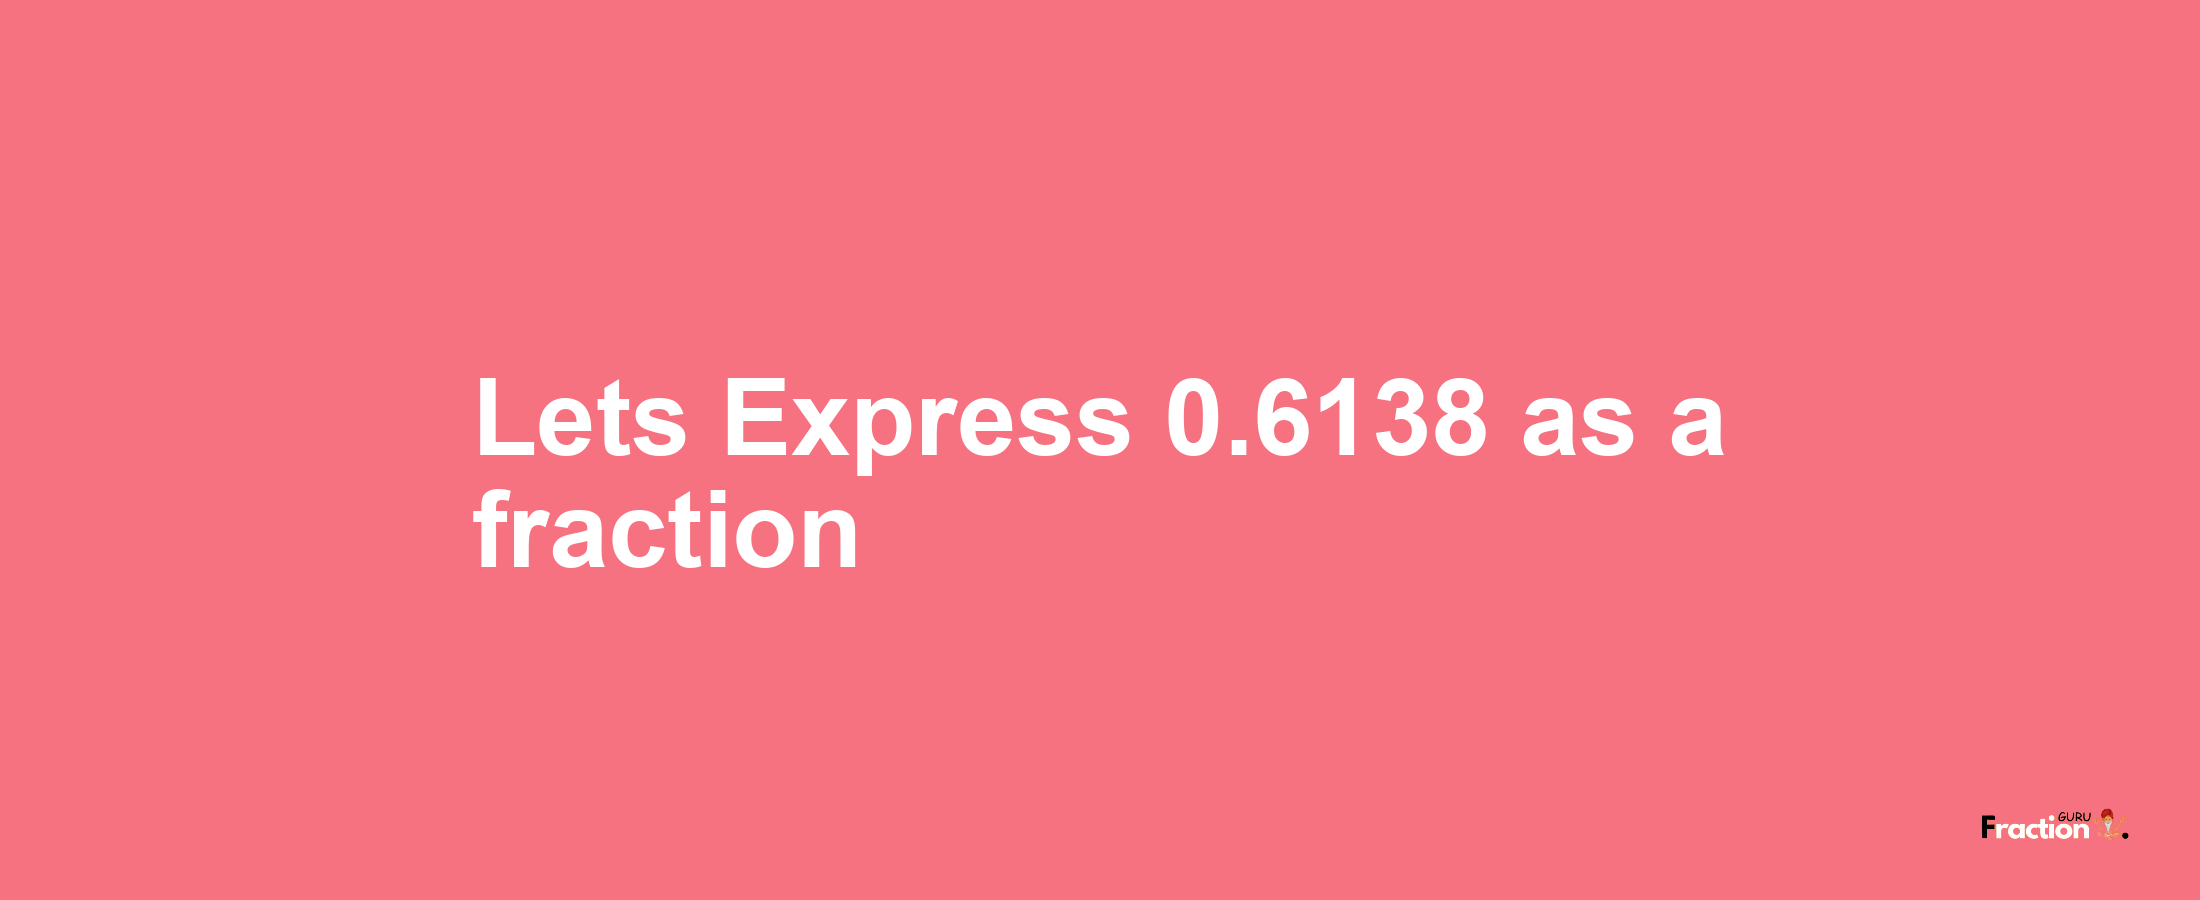 Lets Express 0.6138 as afraction